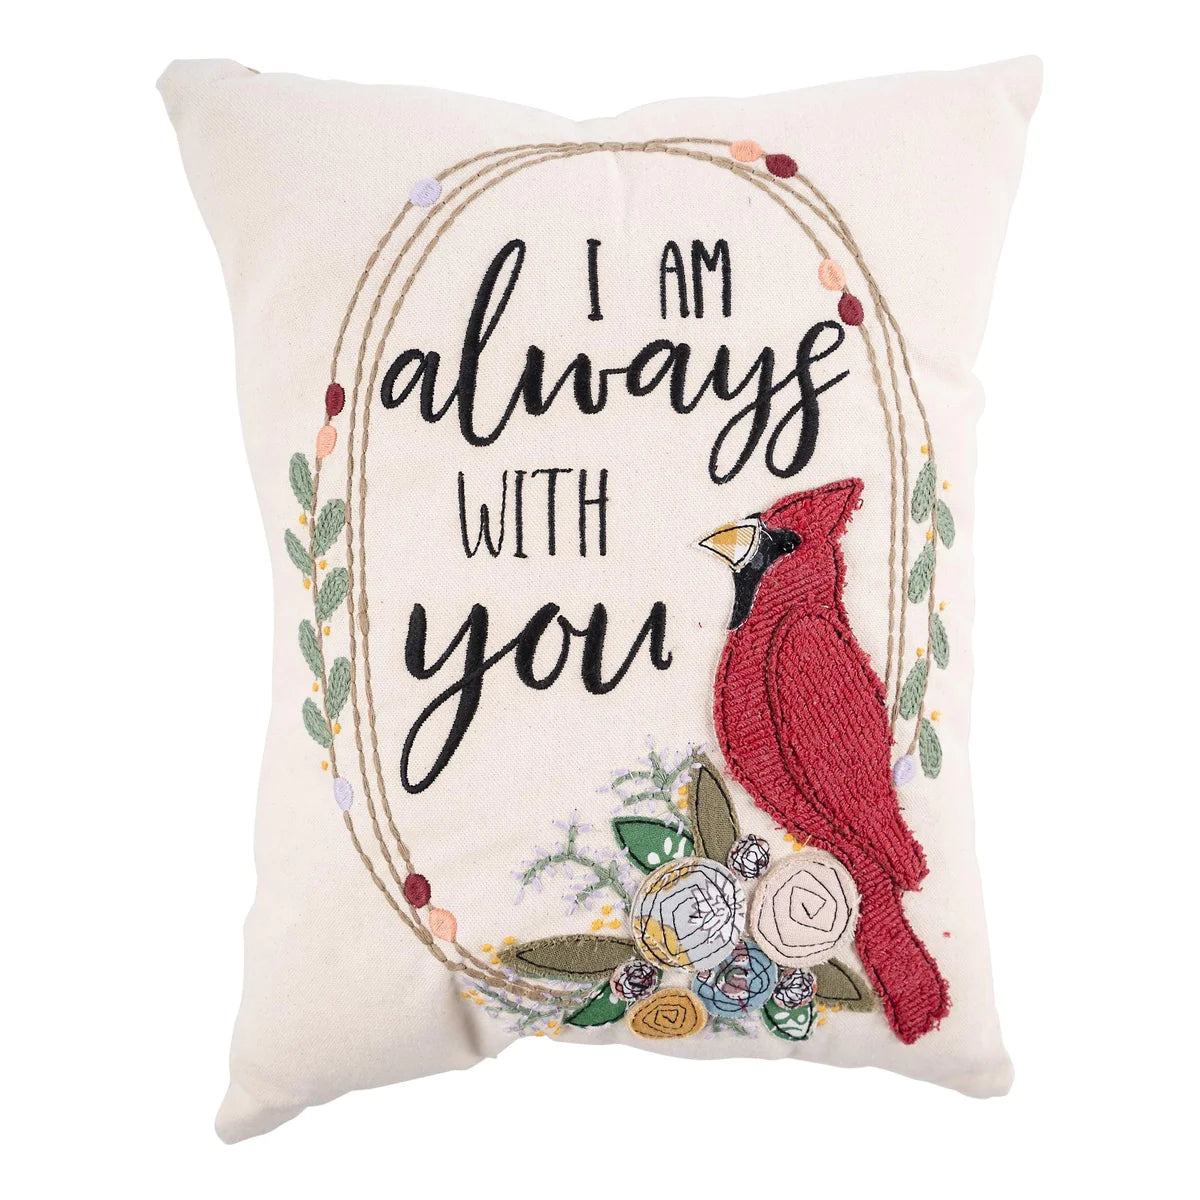 Glory Haus I am always with you pillow